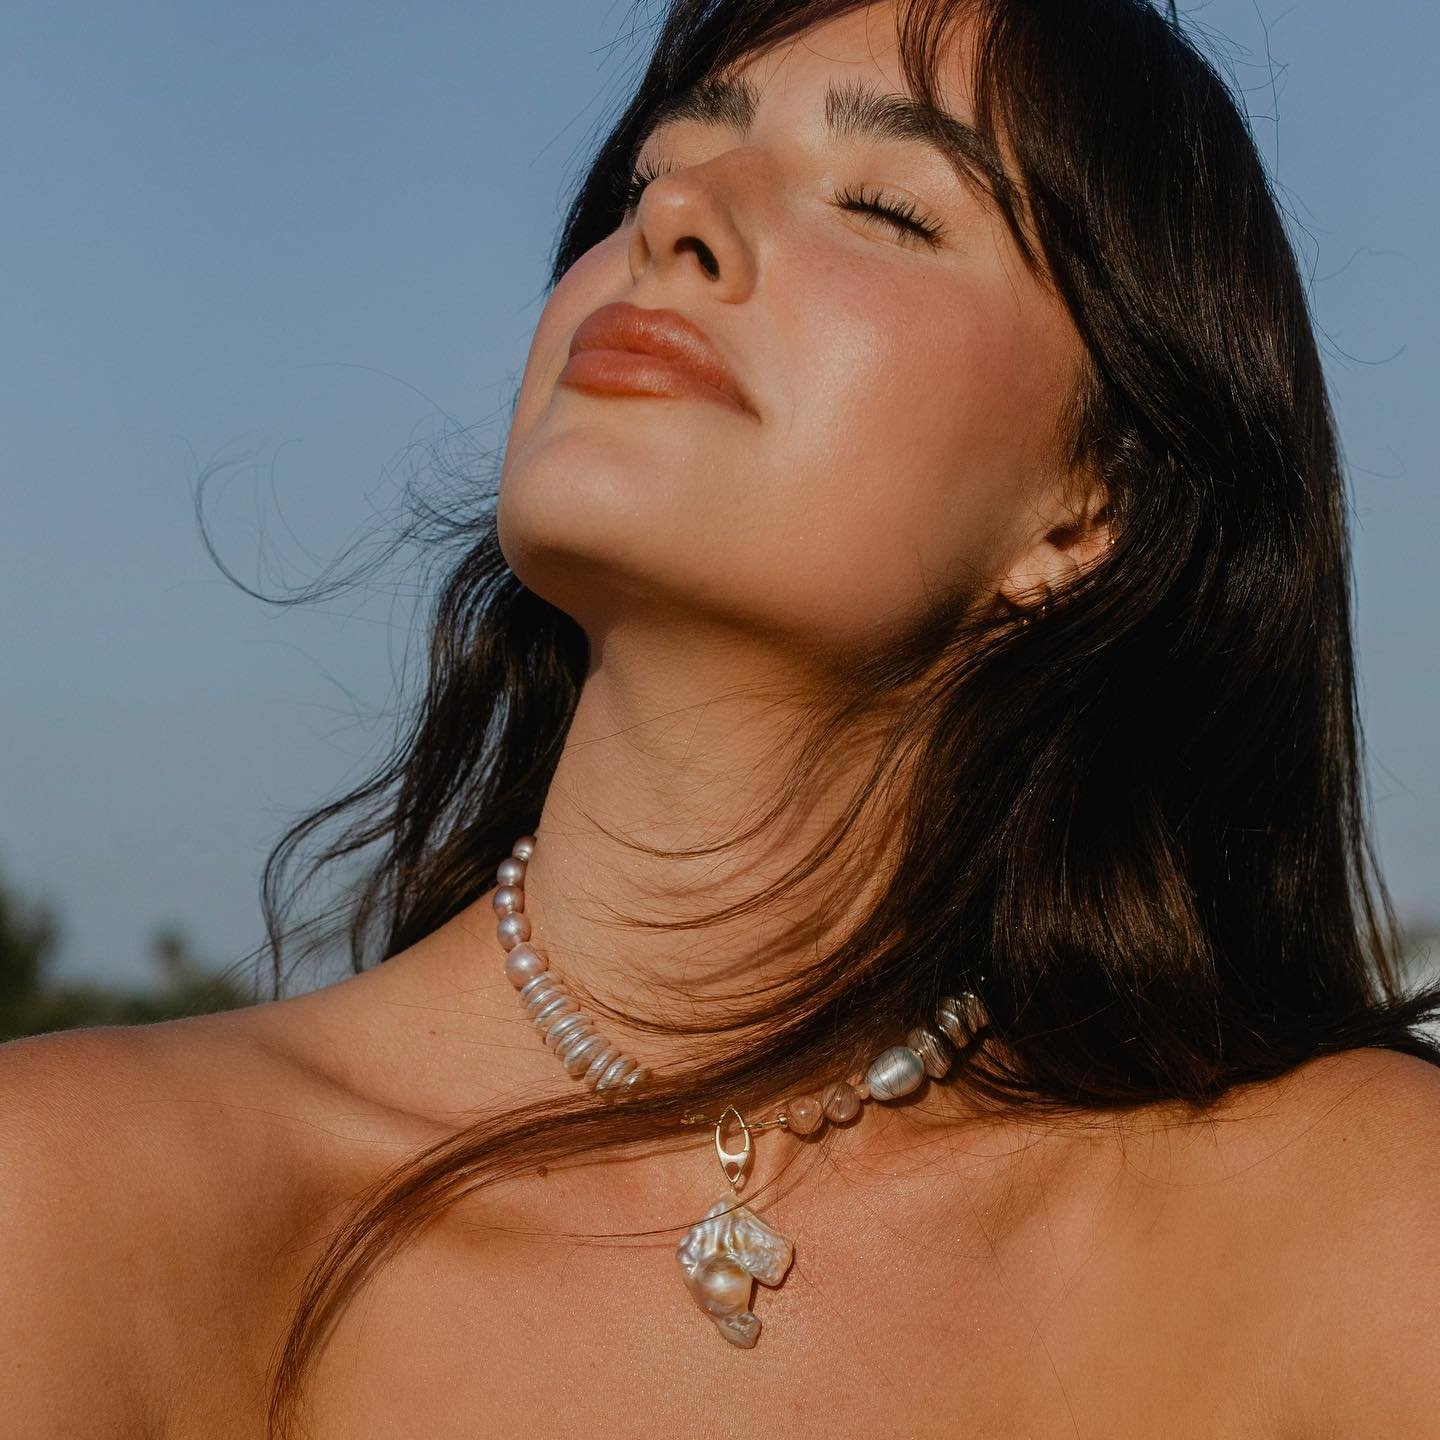 DROPPING TONIGHT - THE GODDESS COLLECTION 🐚

As many of you may or may not know, our co-founder Sacha (&ldquo;SA&rdquo; in SARO) has been creating bespoke, intentionally designed genuine stone and pearl jewelry since she was a young girl. When she a